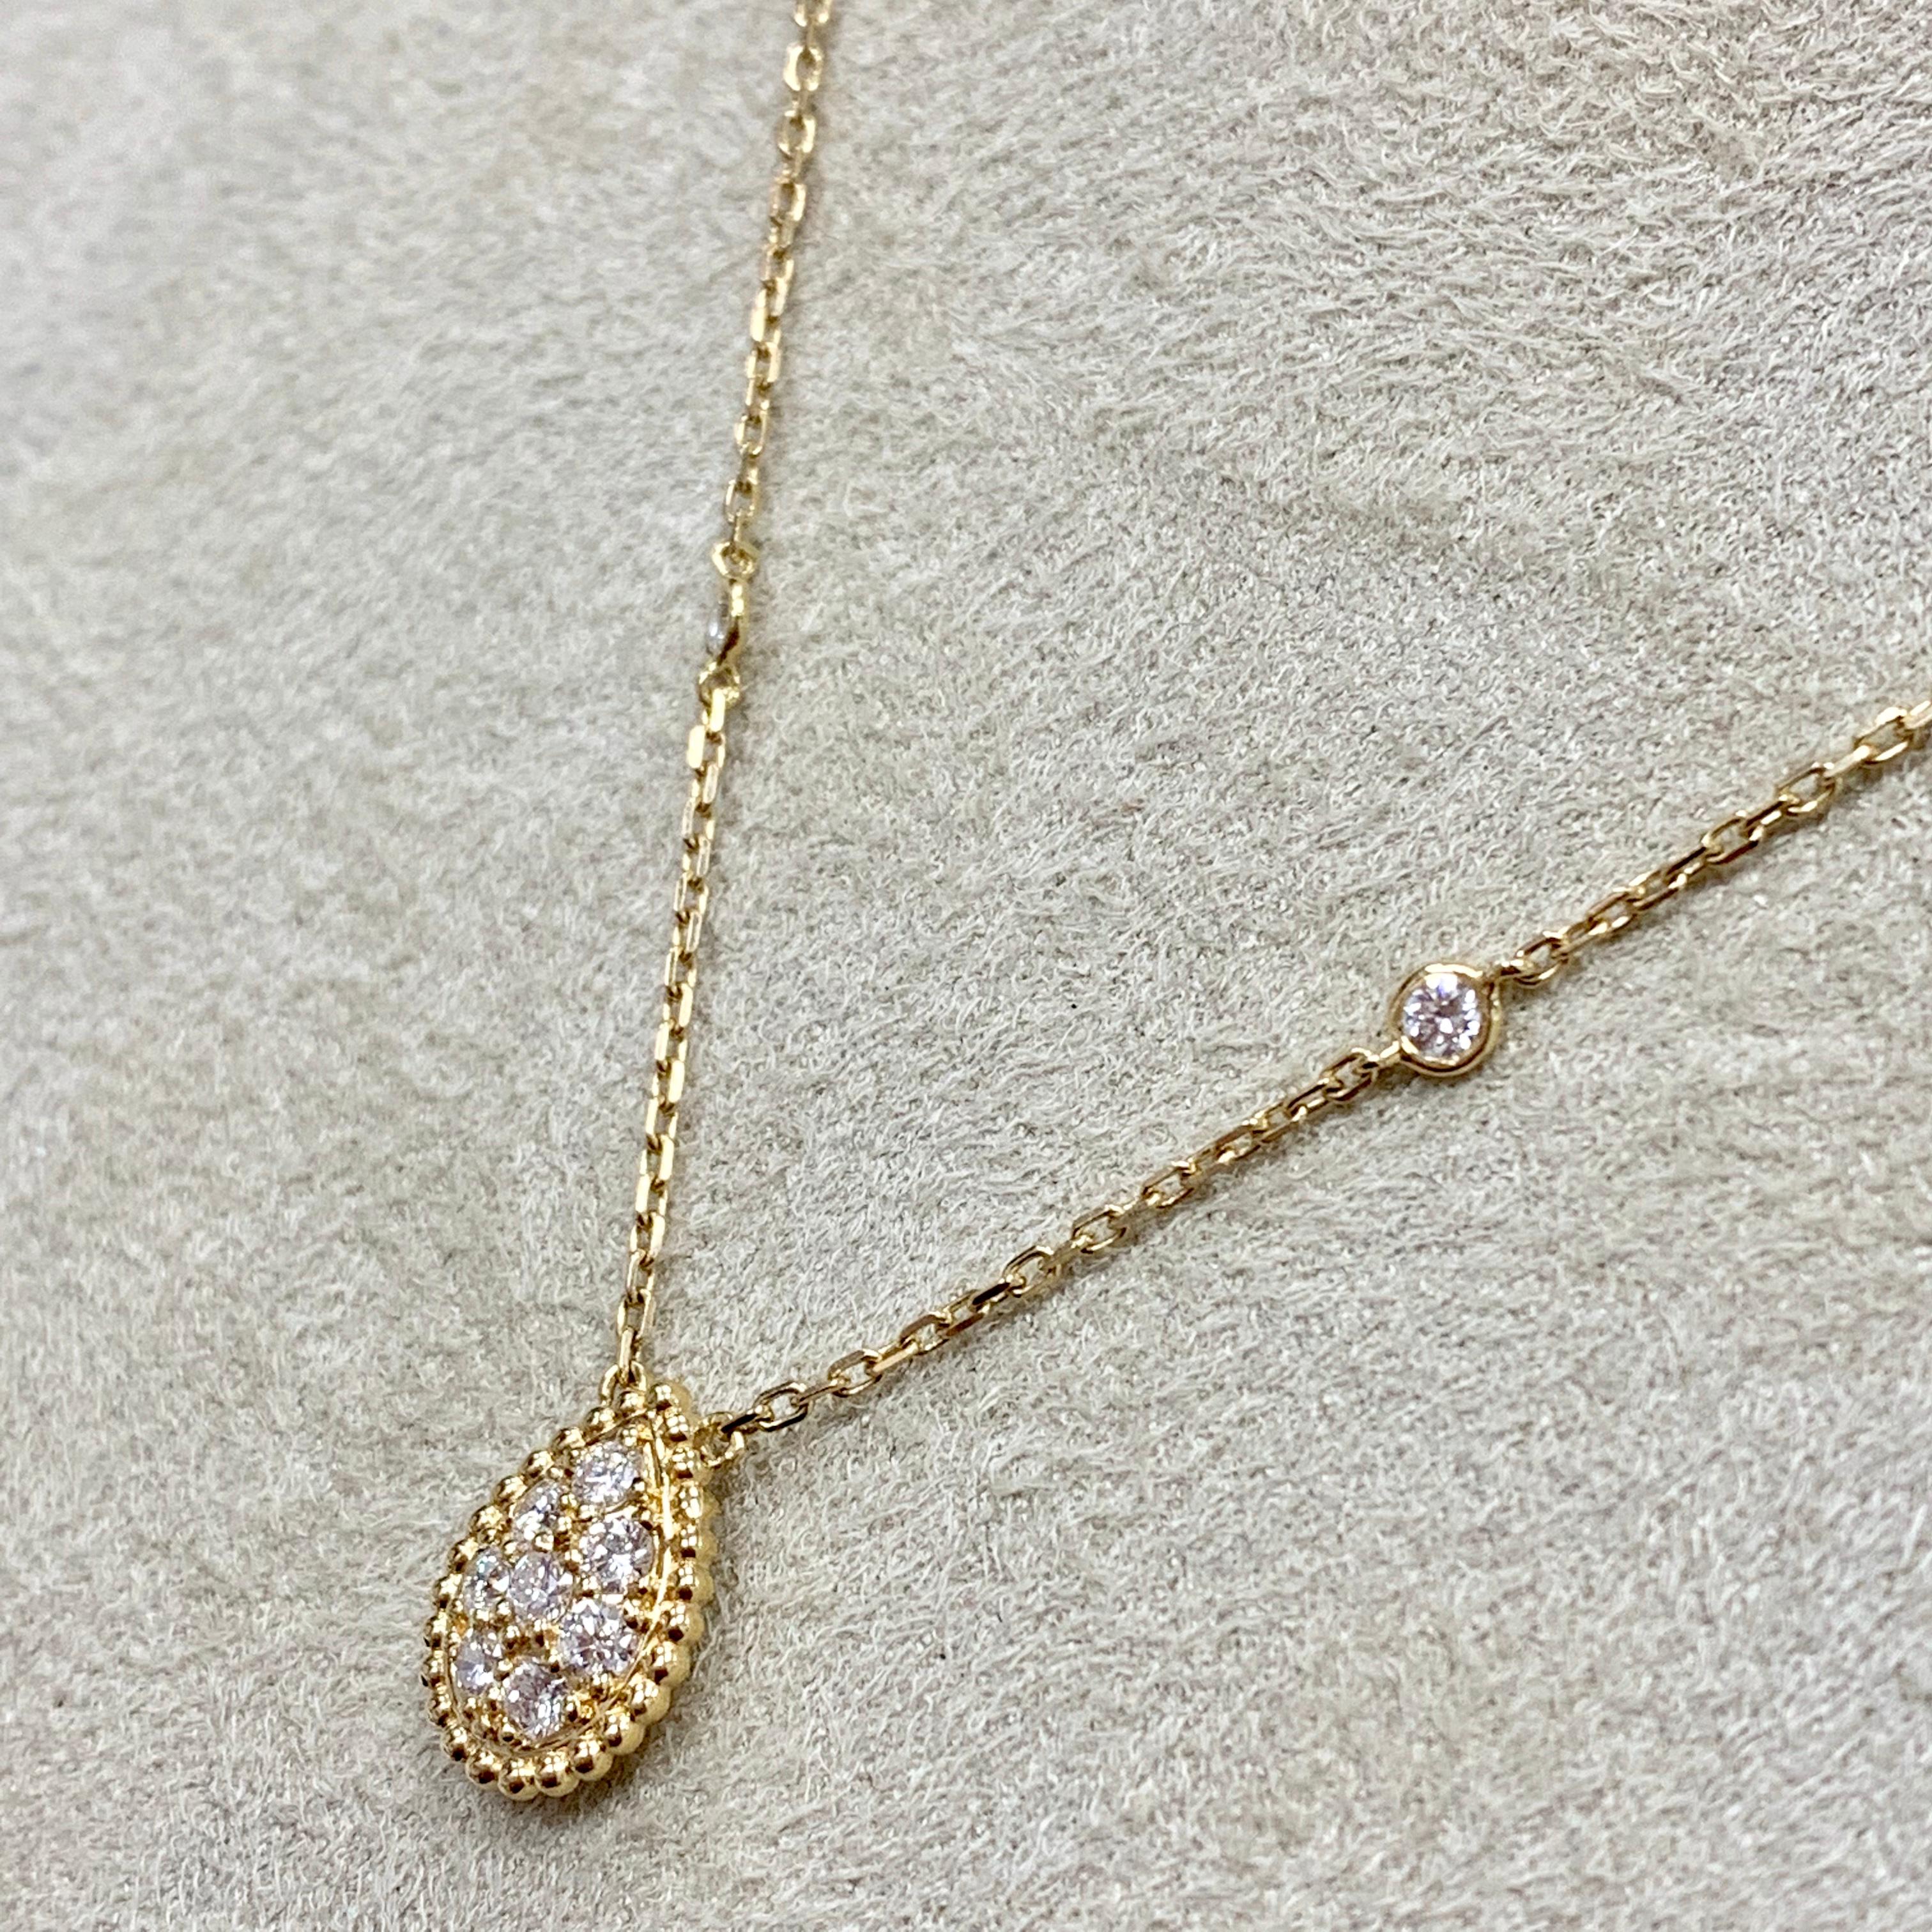 Fun & Chic this necklace is full of life and character. It is great for daily stylish wear or an evening out. 

Diamonds Shape: Round 
Total Diamond Weight: 0.55 ct 
No. of Diamonds: 12 
Diamond Color: G - H 
Diamond Clarity: VS (Very Slightly